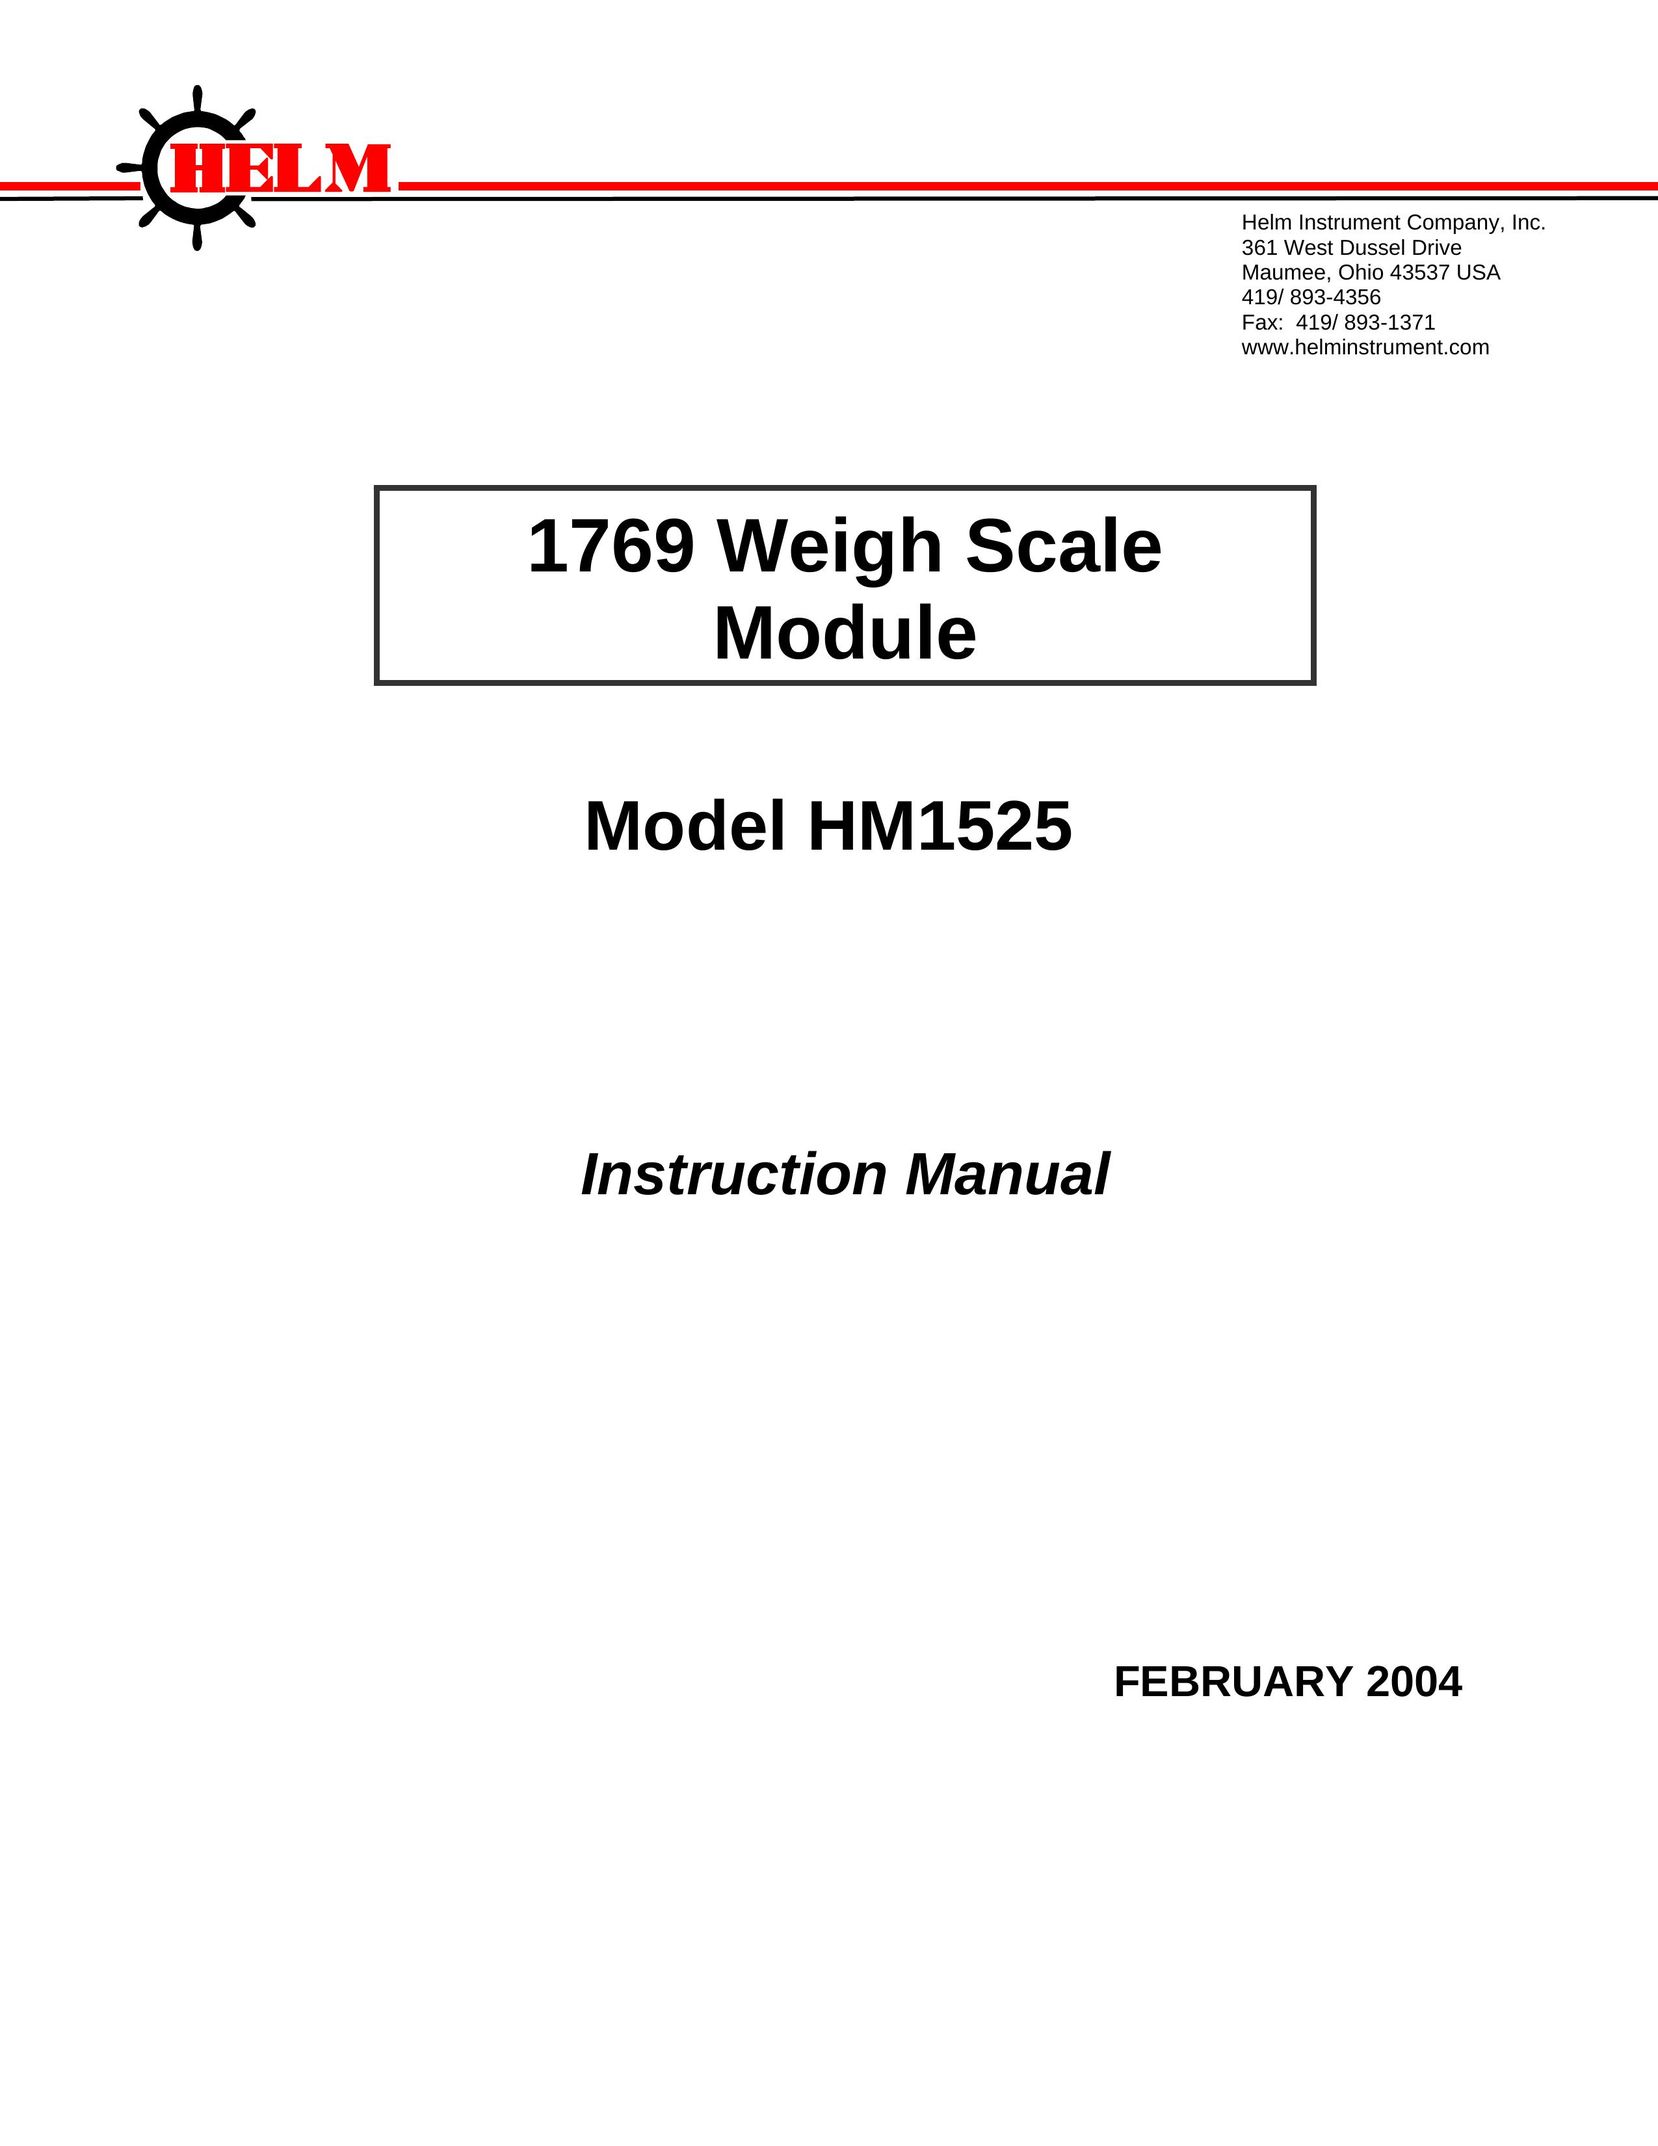 The Helman Group HM1525 Fitness Equipment User Manual